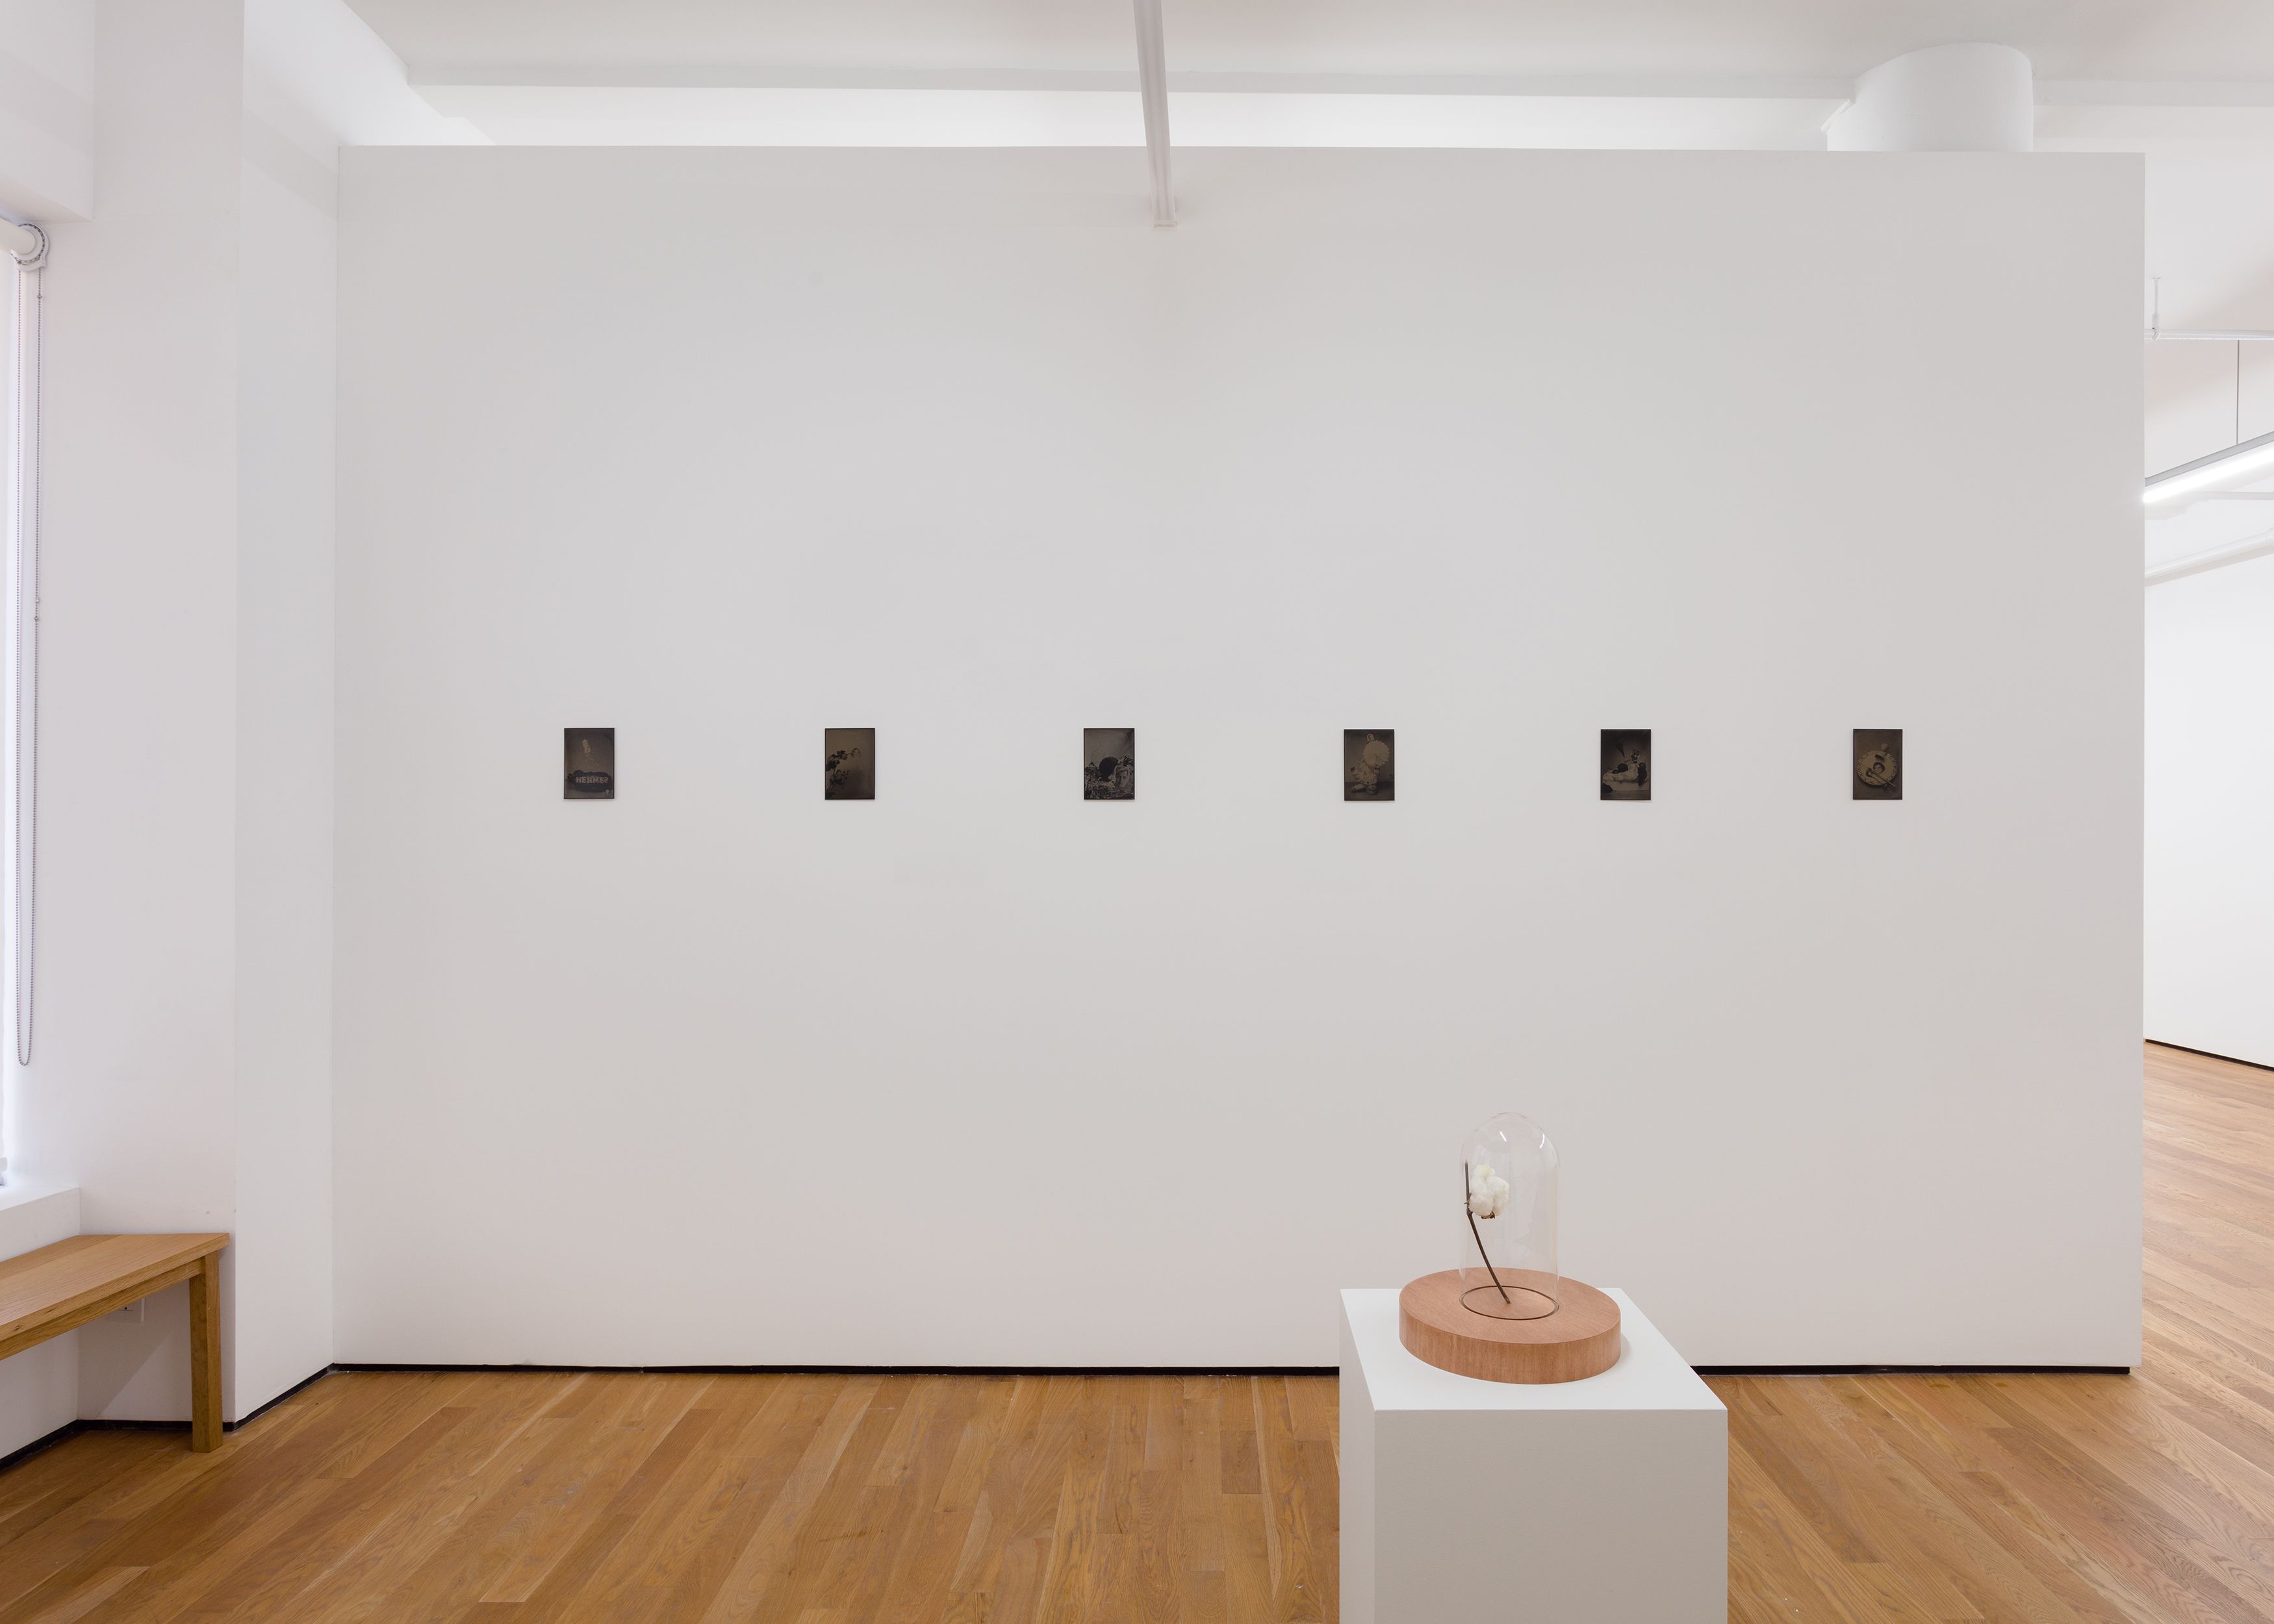 Château Shatto, installation view, Foxy Production, New York